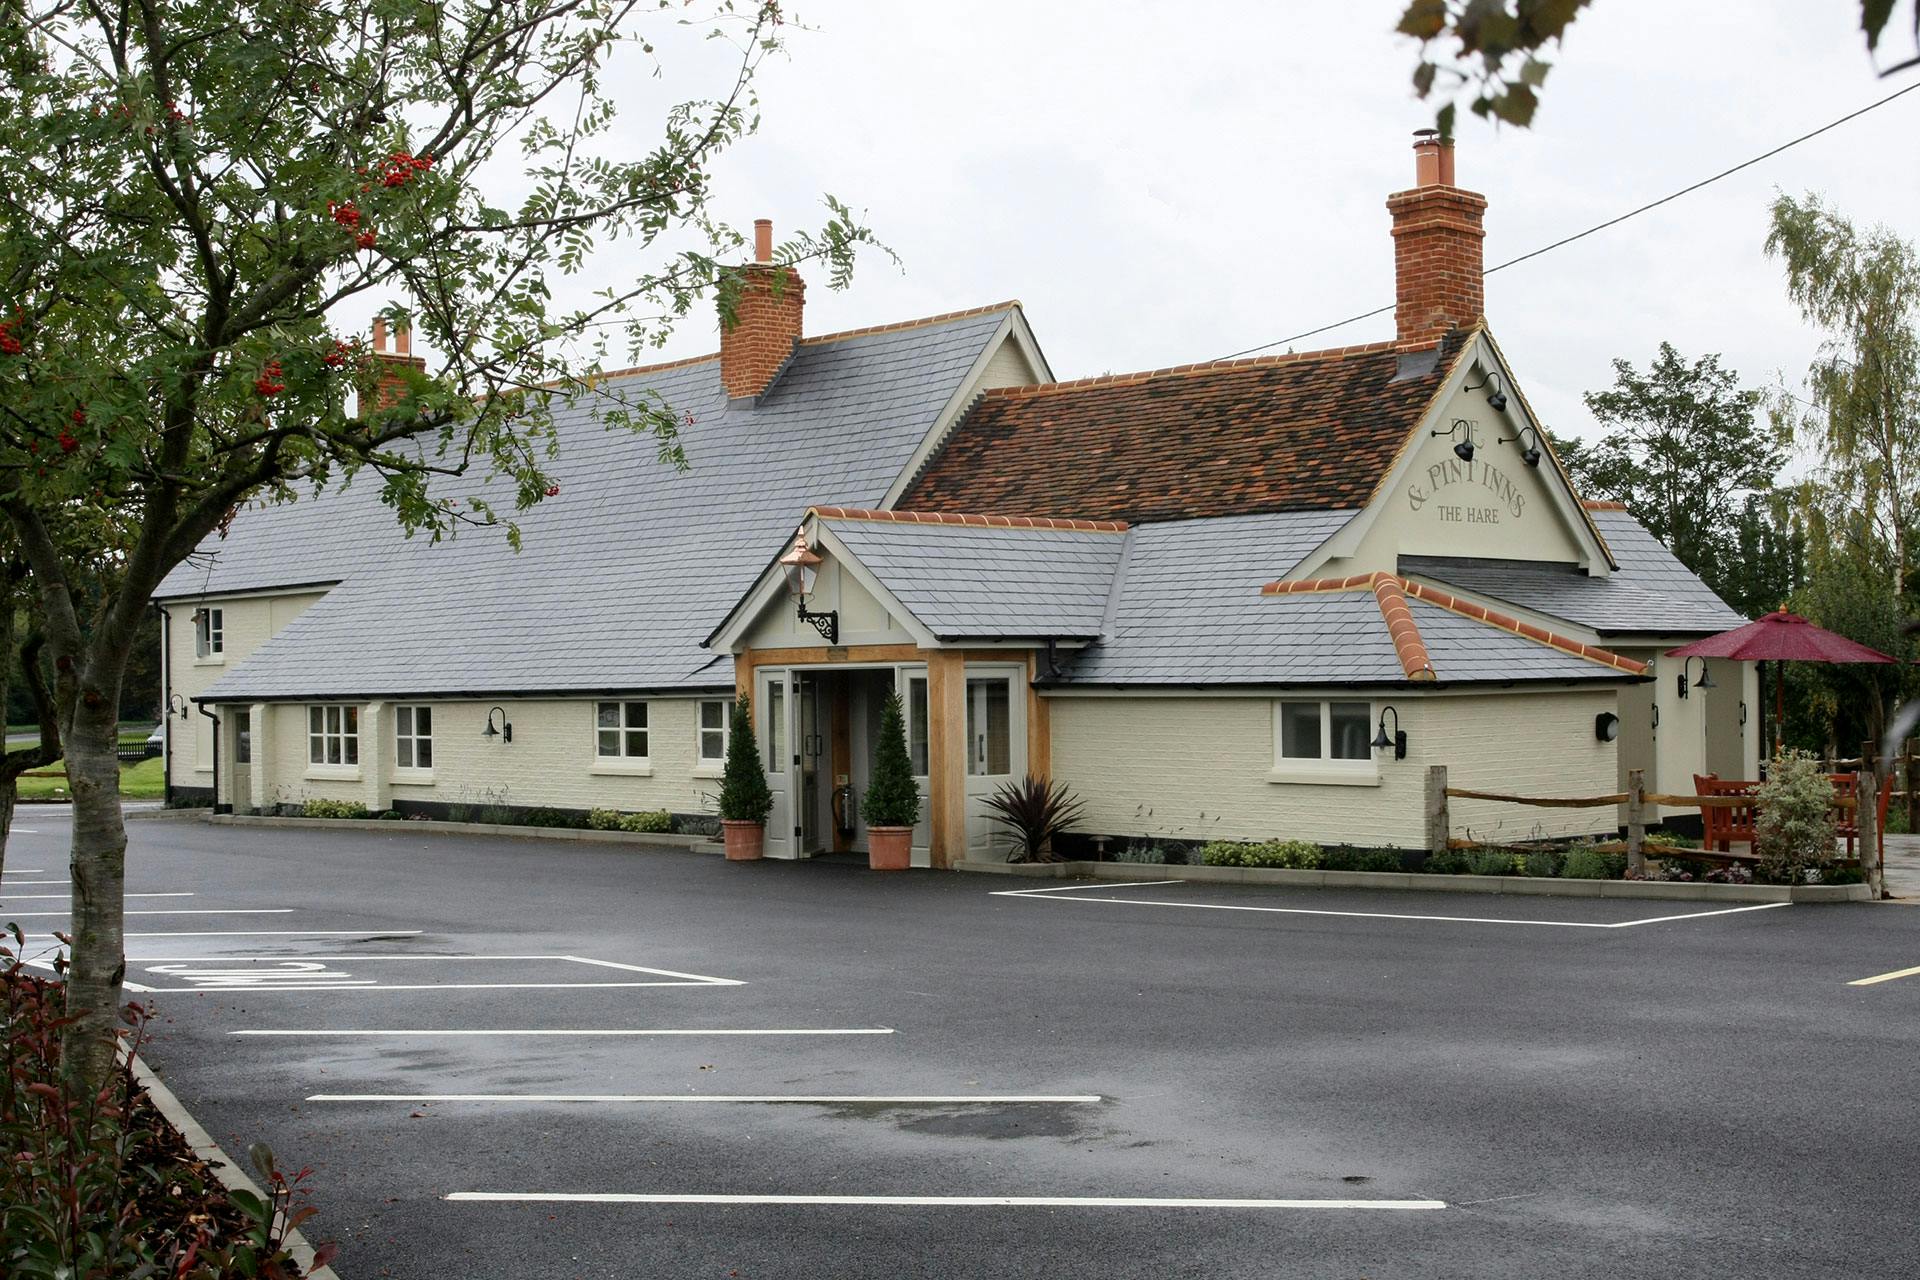 Photo of The Hare, Chelmsford